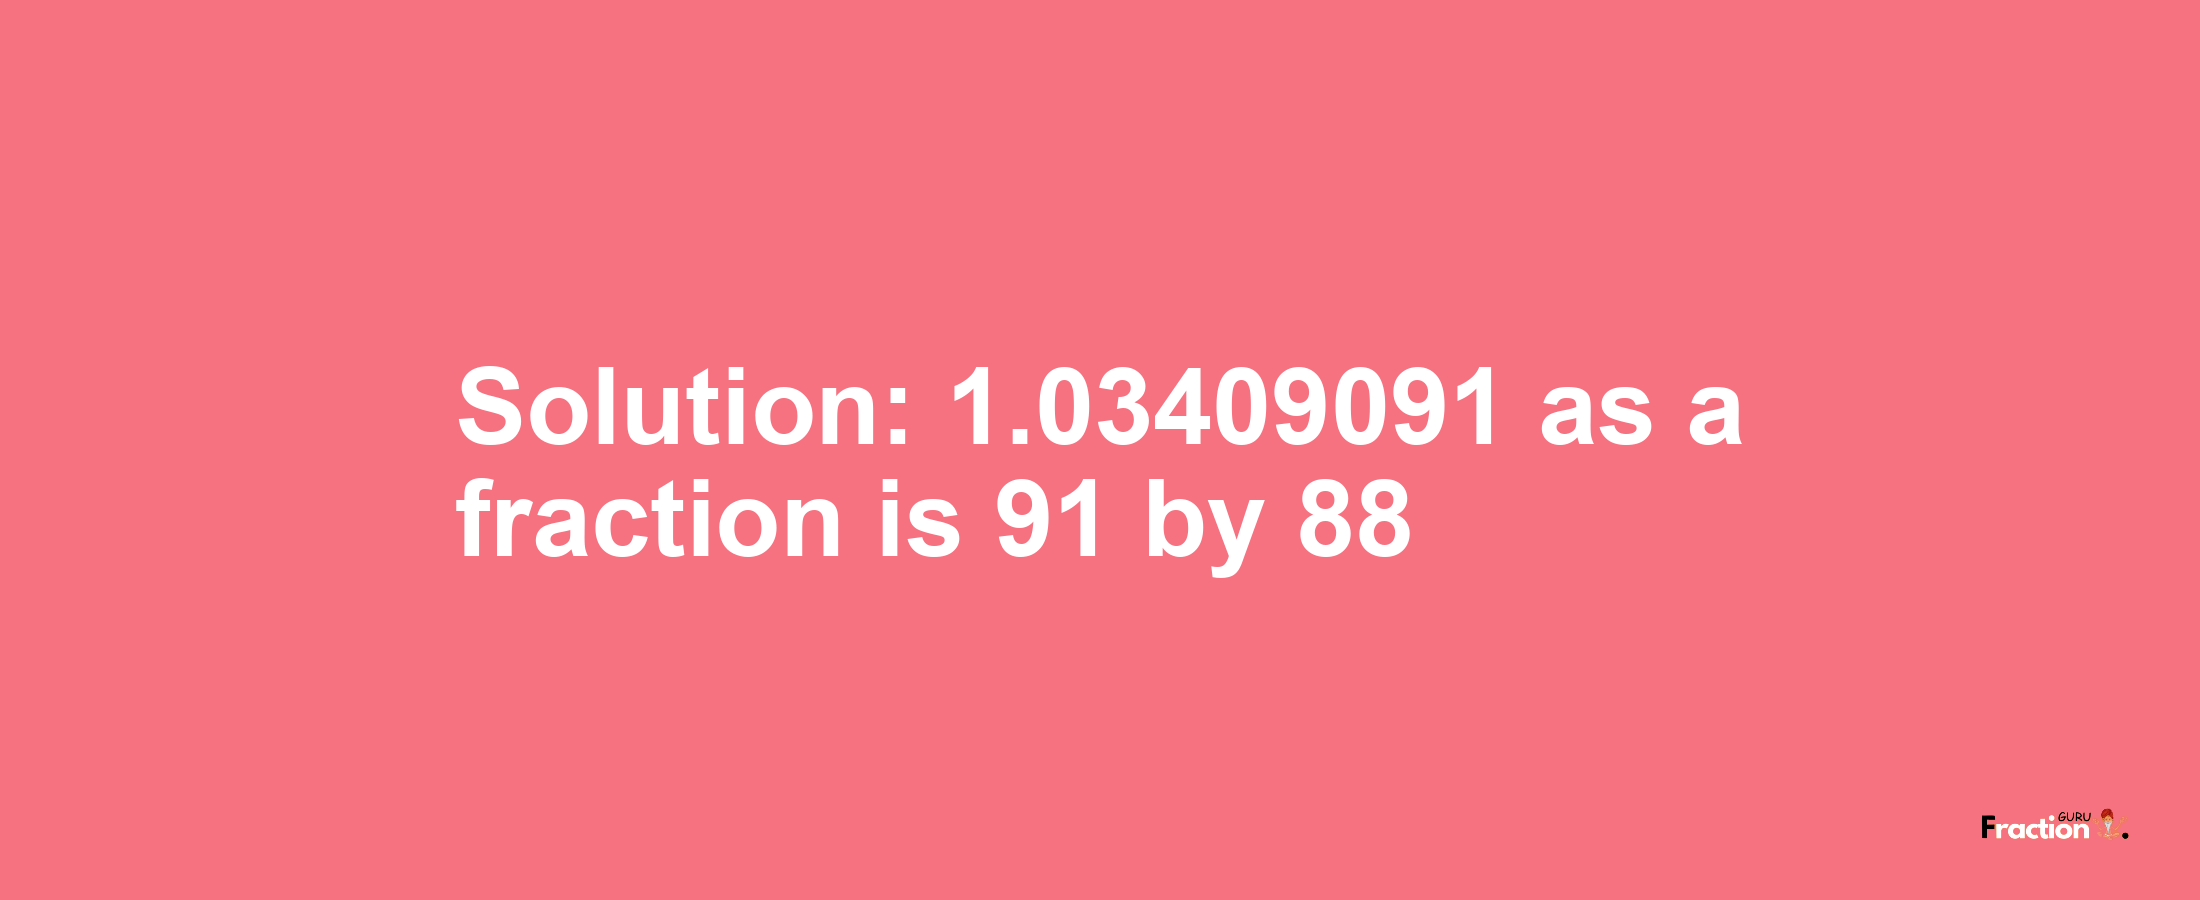 Solution:1.03409091 as a fraction is 91/88